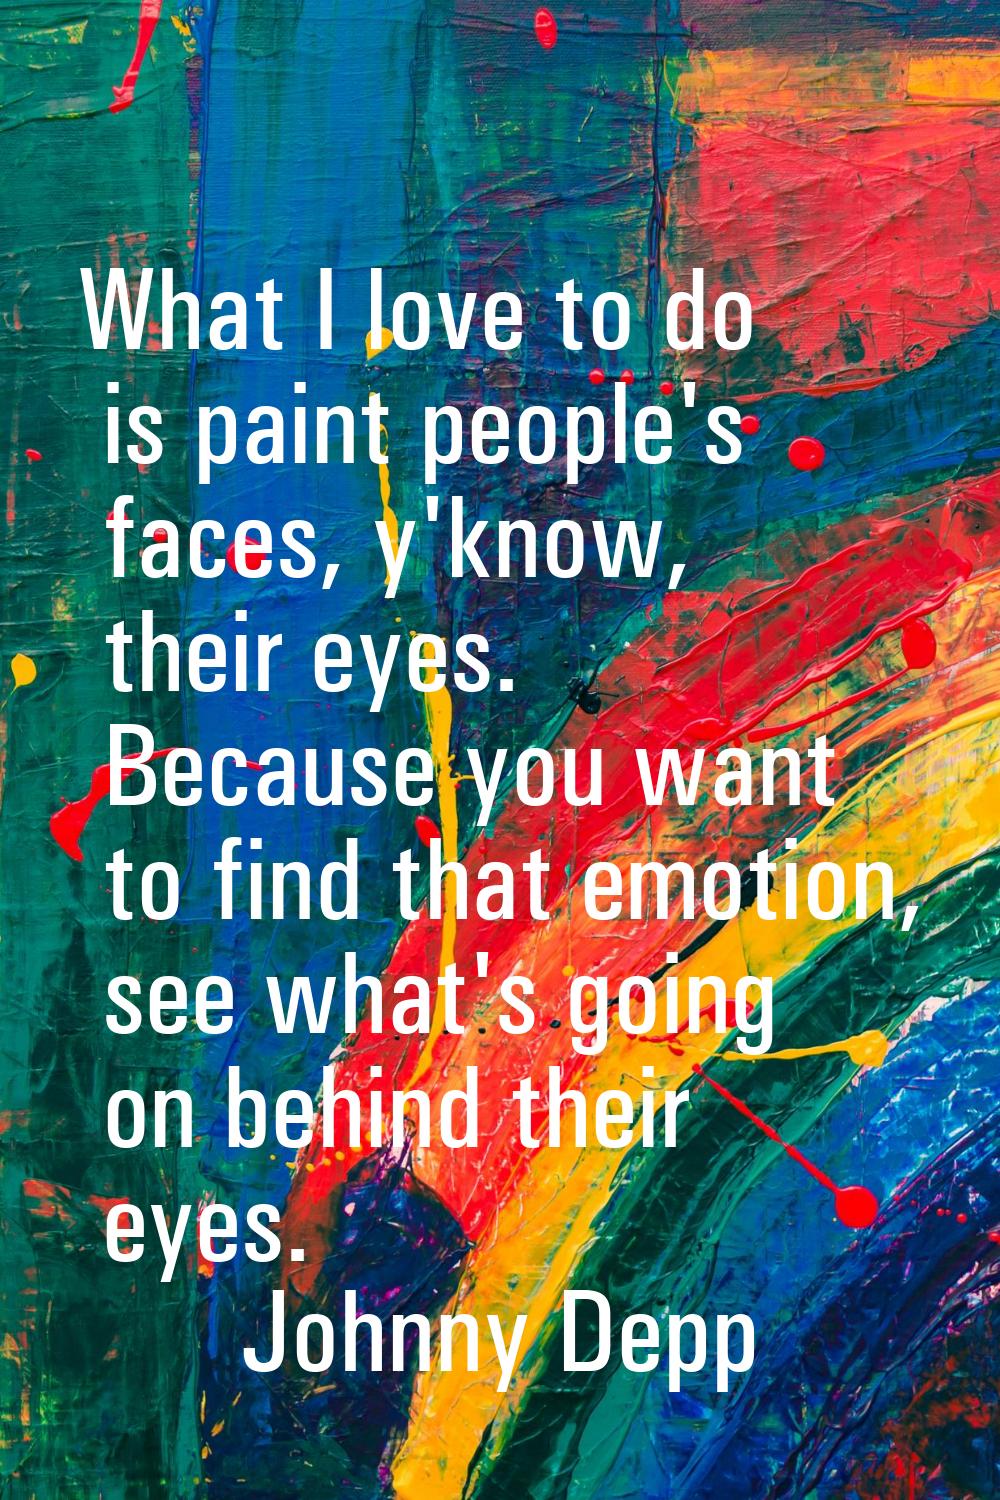 What I love to do is paint people's faces, y'know, their eyes. Because you want to find that emotio